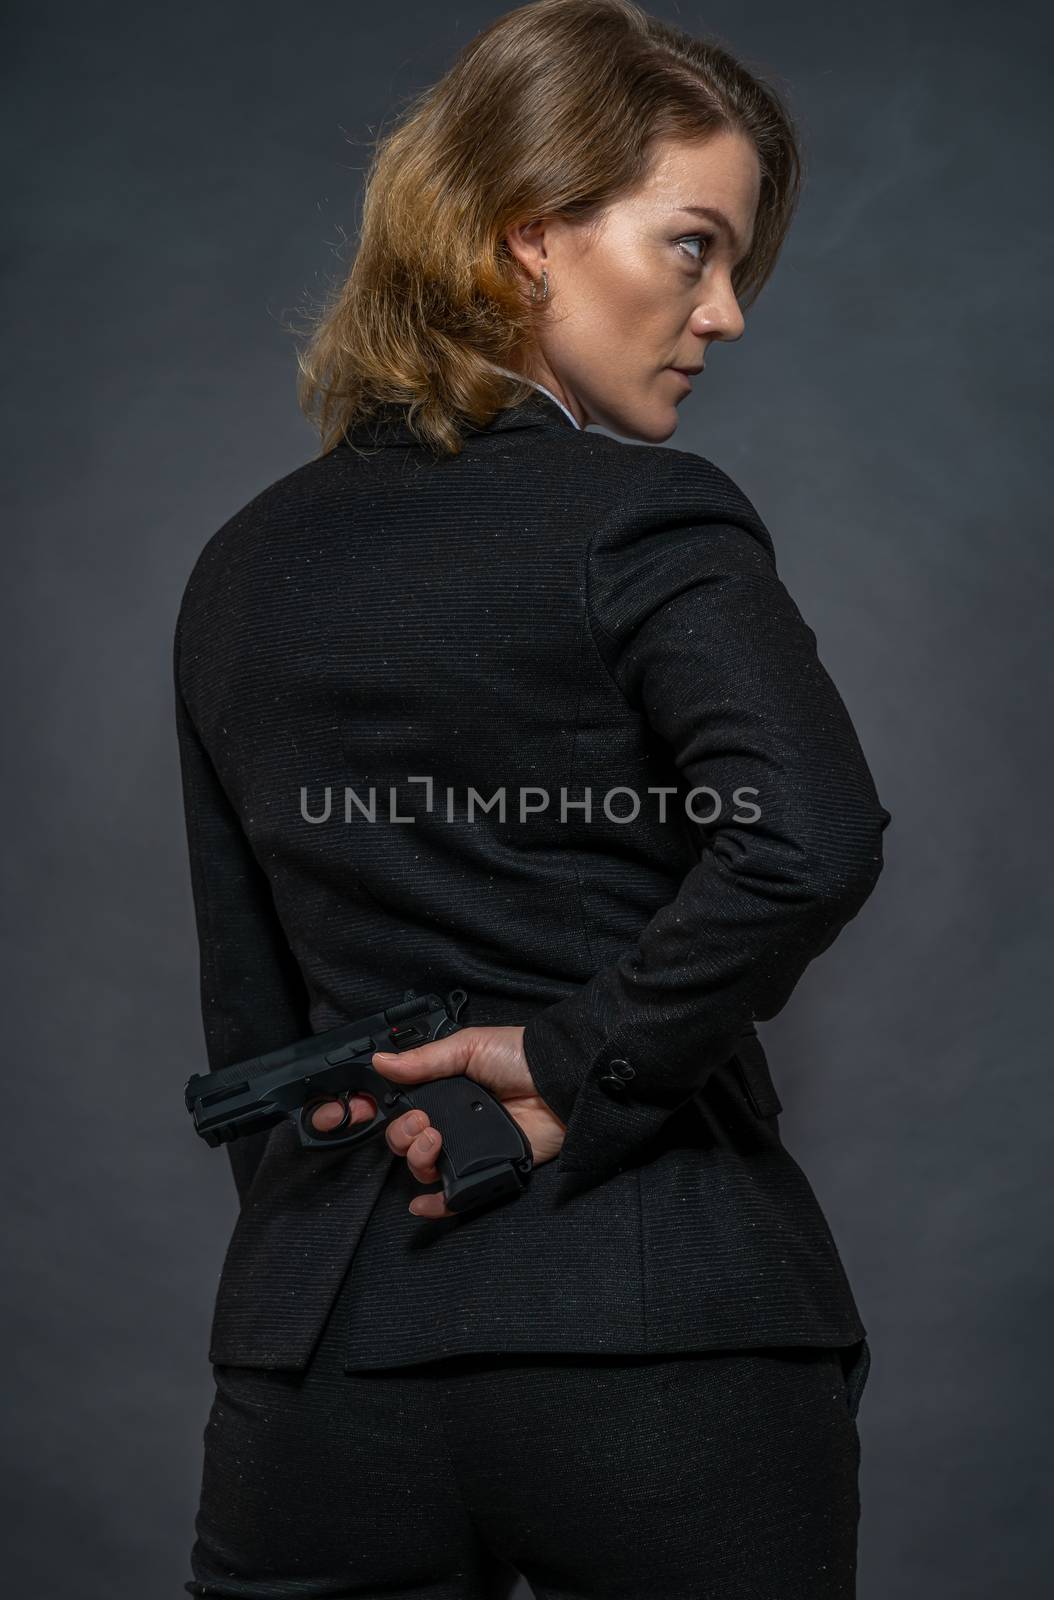 gun in hand behind the back of a woman in a suit.